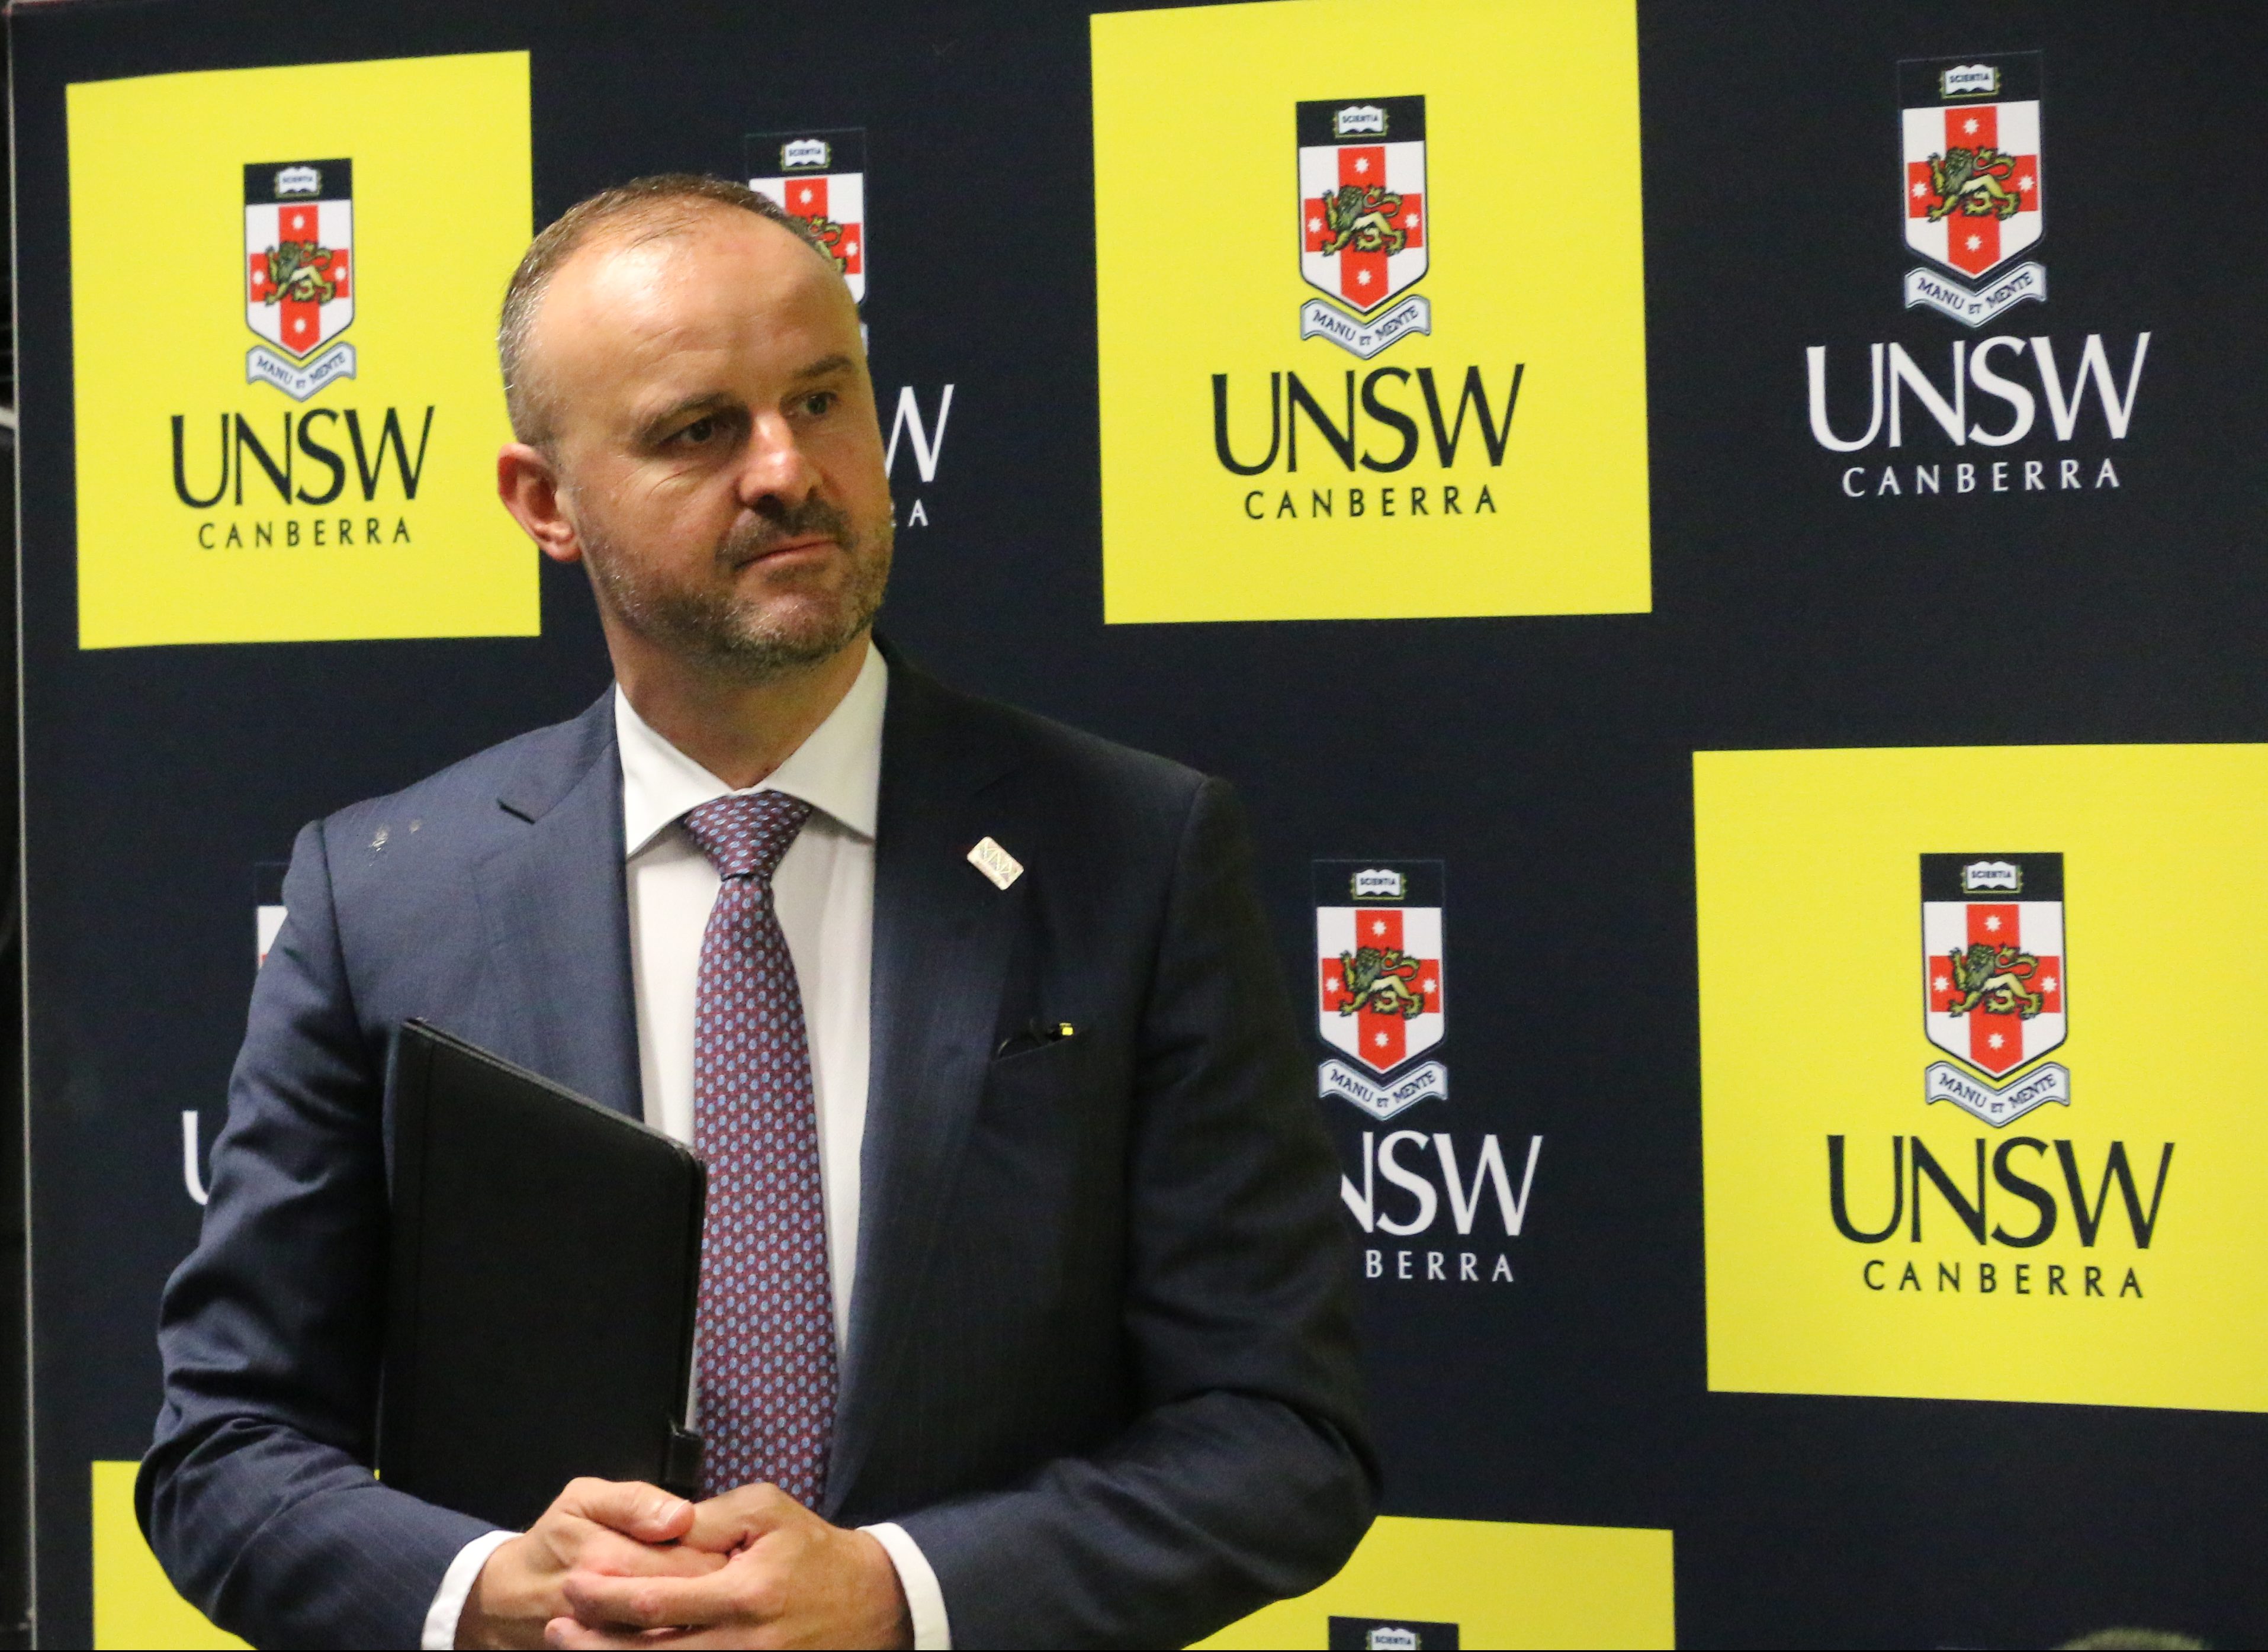 Government seals deal for new UNSW campus in Canberra